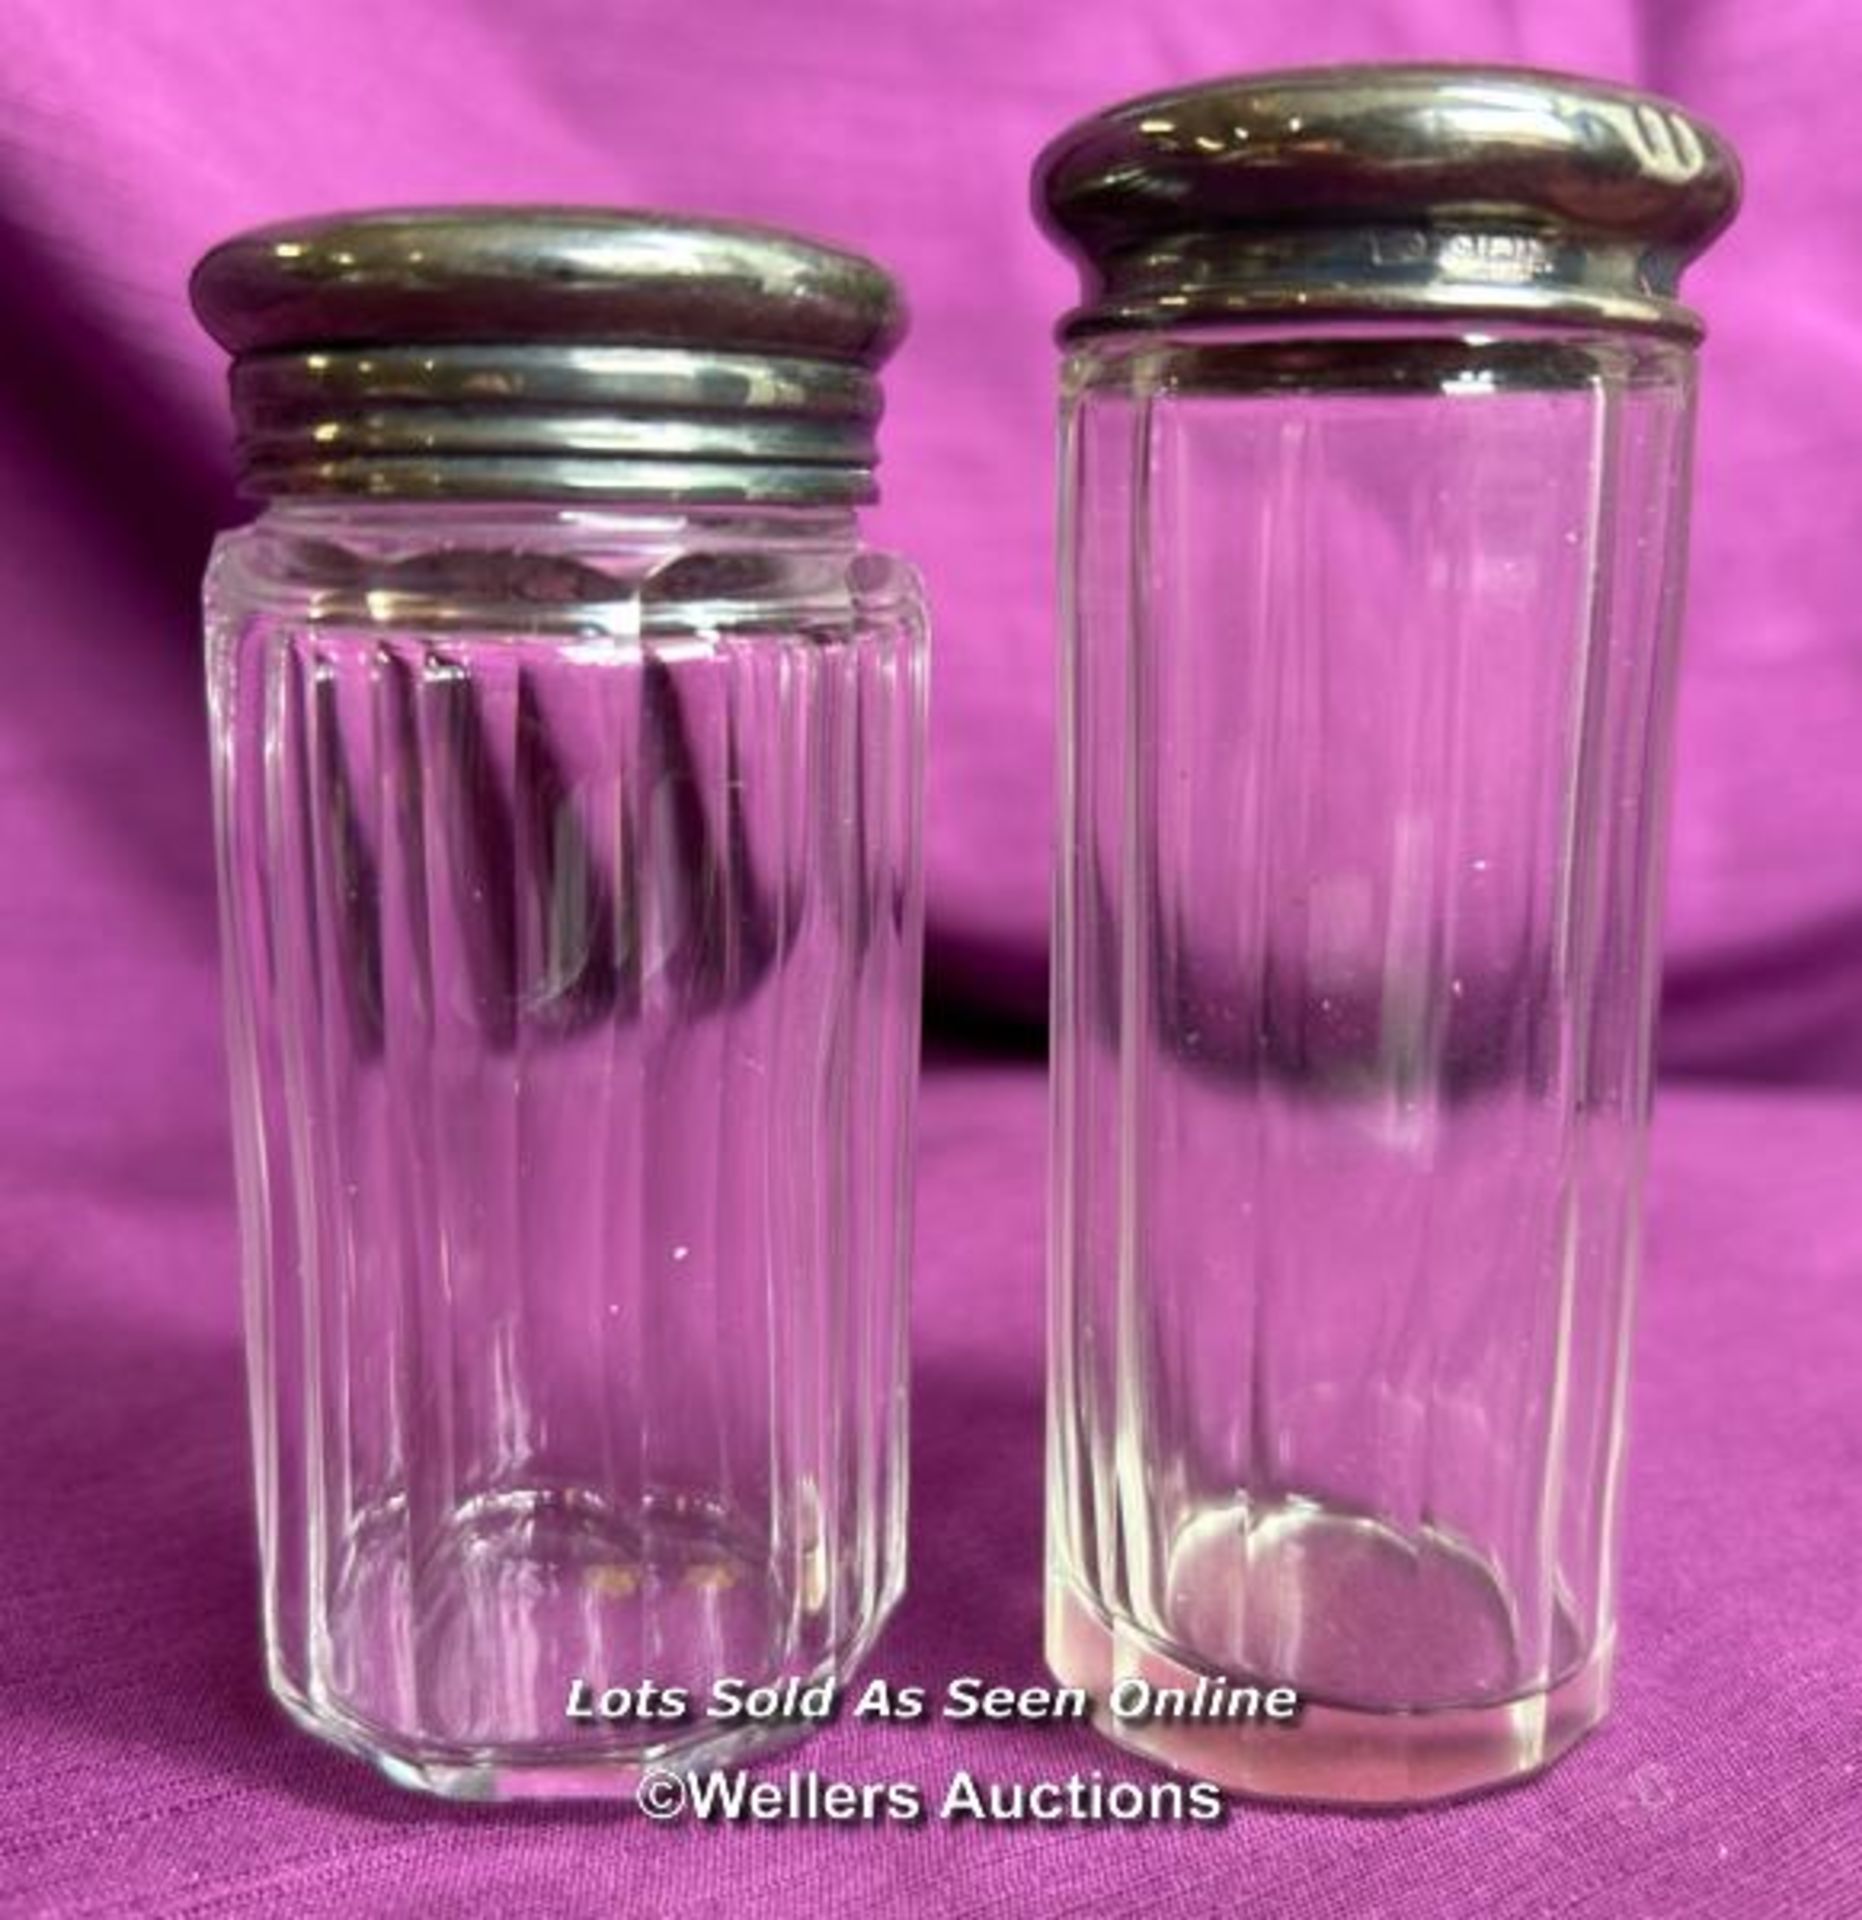 TWO HALLMARKED SILVER TOPPED AND CUT GLASS BEVELLED JARS, TALLEST 10CM, TOTAL SILVER WEIGHT 13GMS